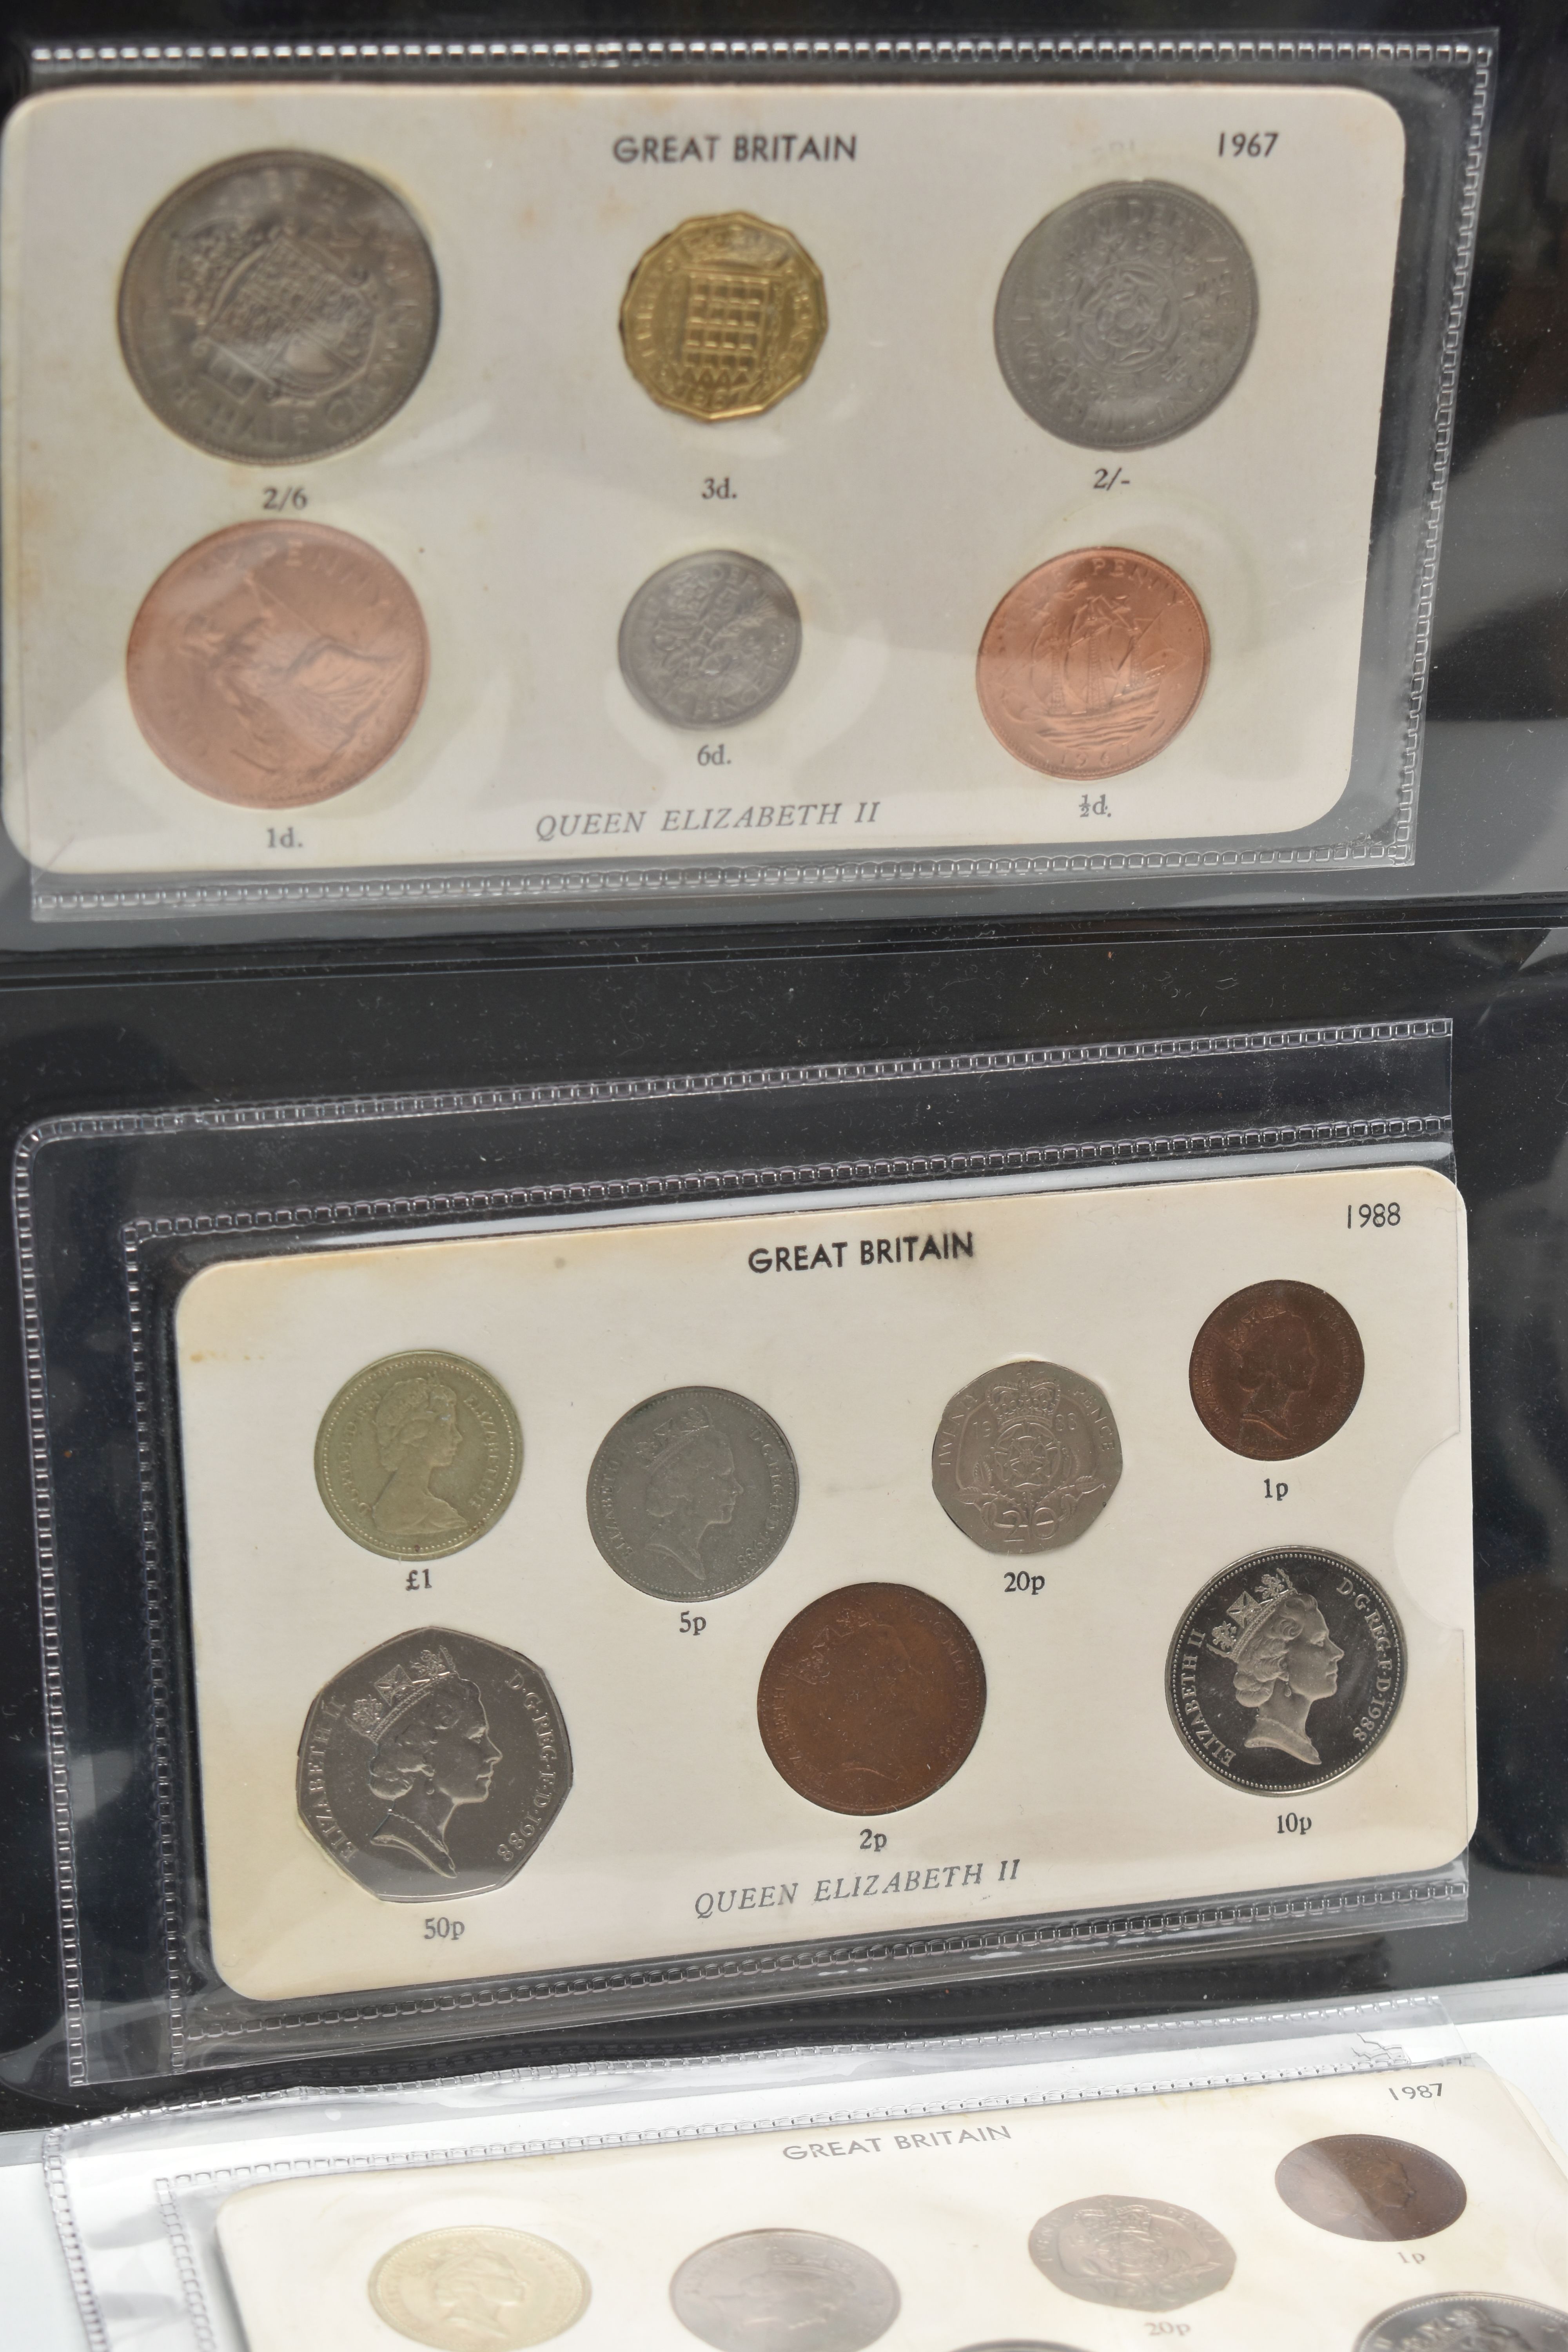 TWO COIN ALBUMS OF UK COINAGE FROM 1974-2018, to include Two Pound coins, Fifty Pence coins, with - Image 4 of 8